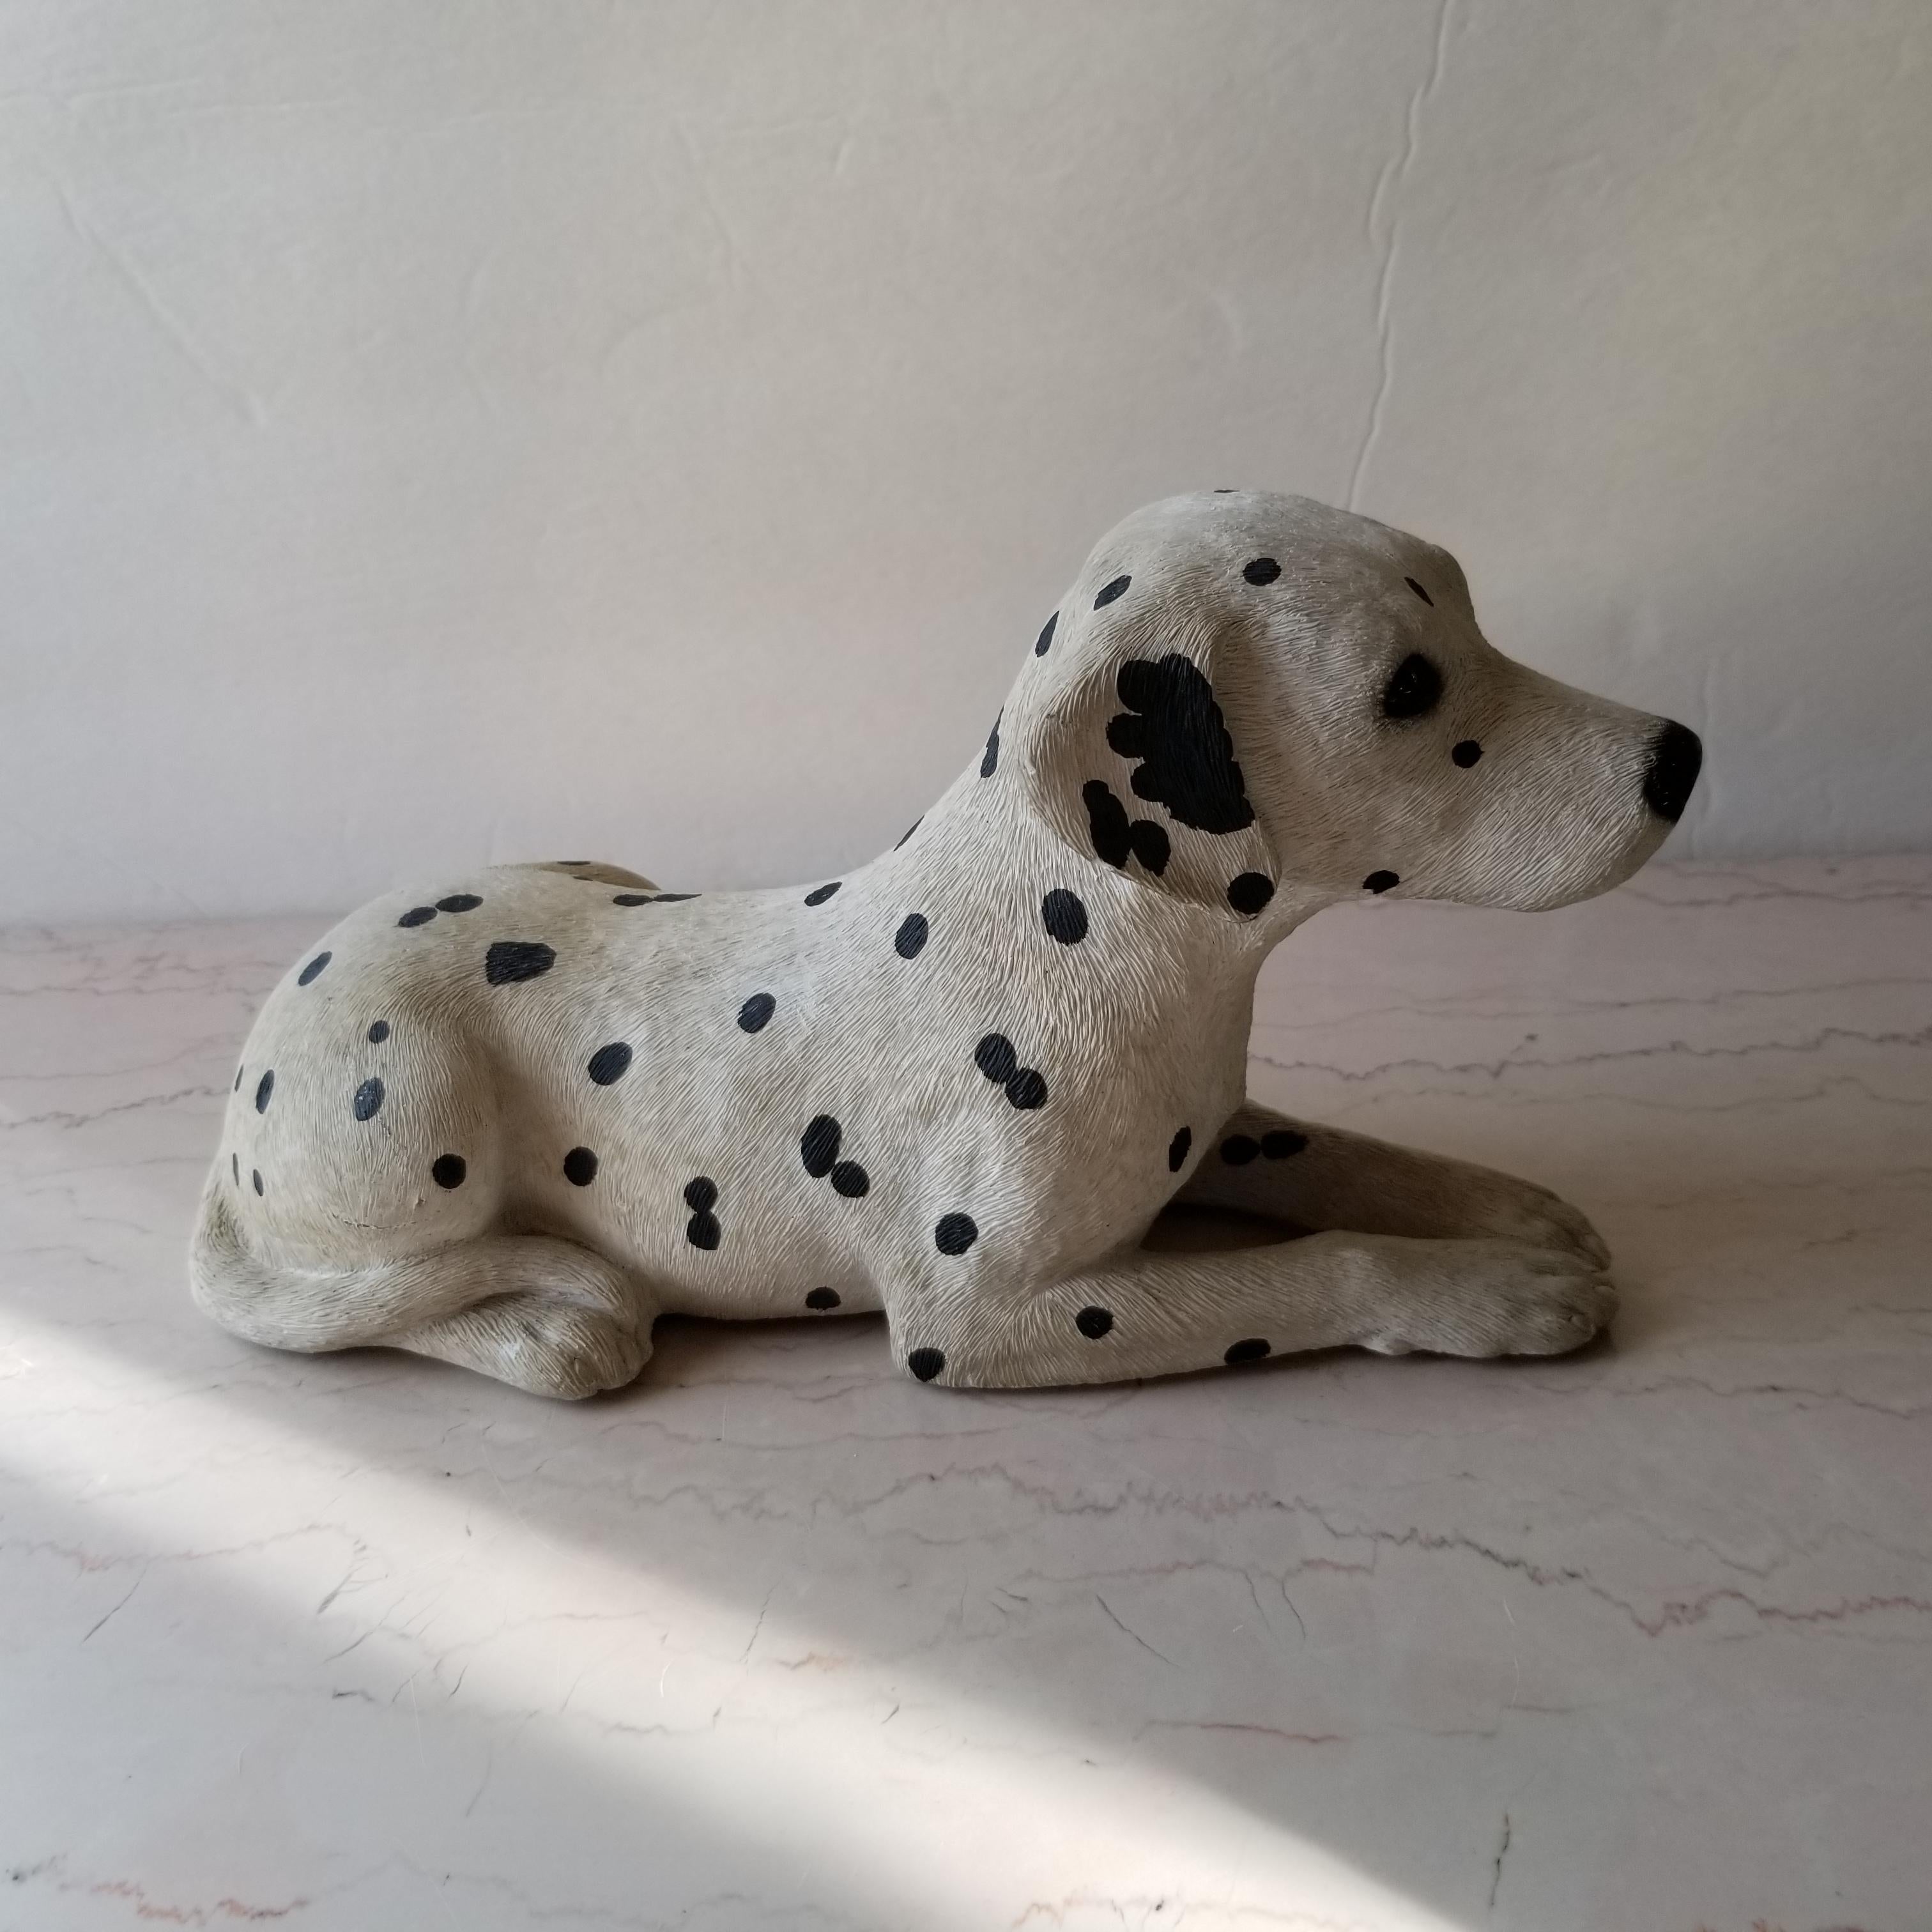 For your pleasure:
So beautiful, Lifelike Dalmation Dog table sculpture. Hand cast in clay-like material and hand painted.
Vintage piece 1986. Signed by artist Sandra Brue for Sandicast San Diego CA. See stamp.
Measures approximately: 10.5L x 5 W